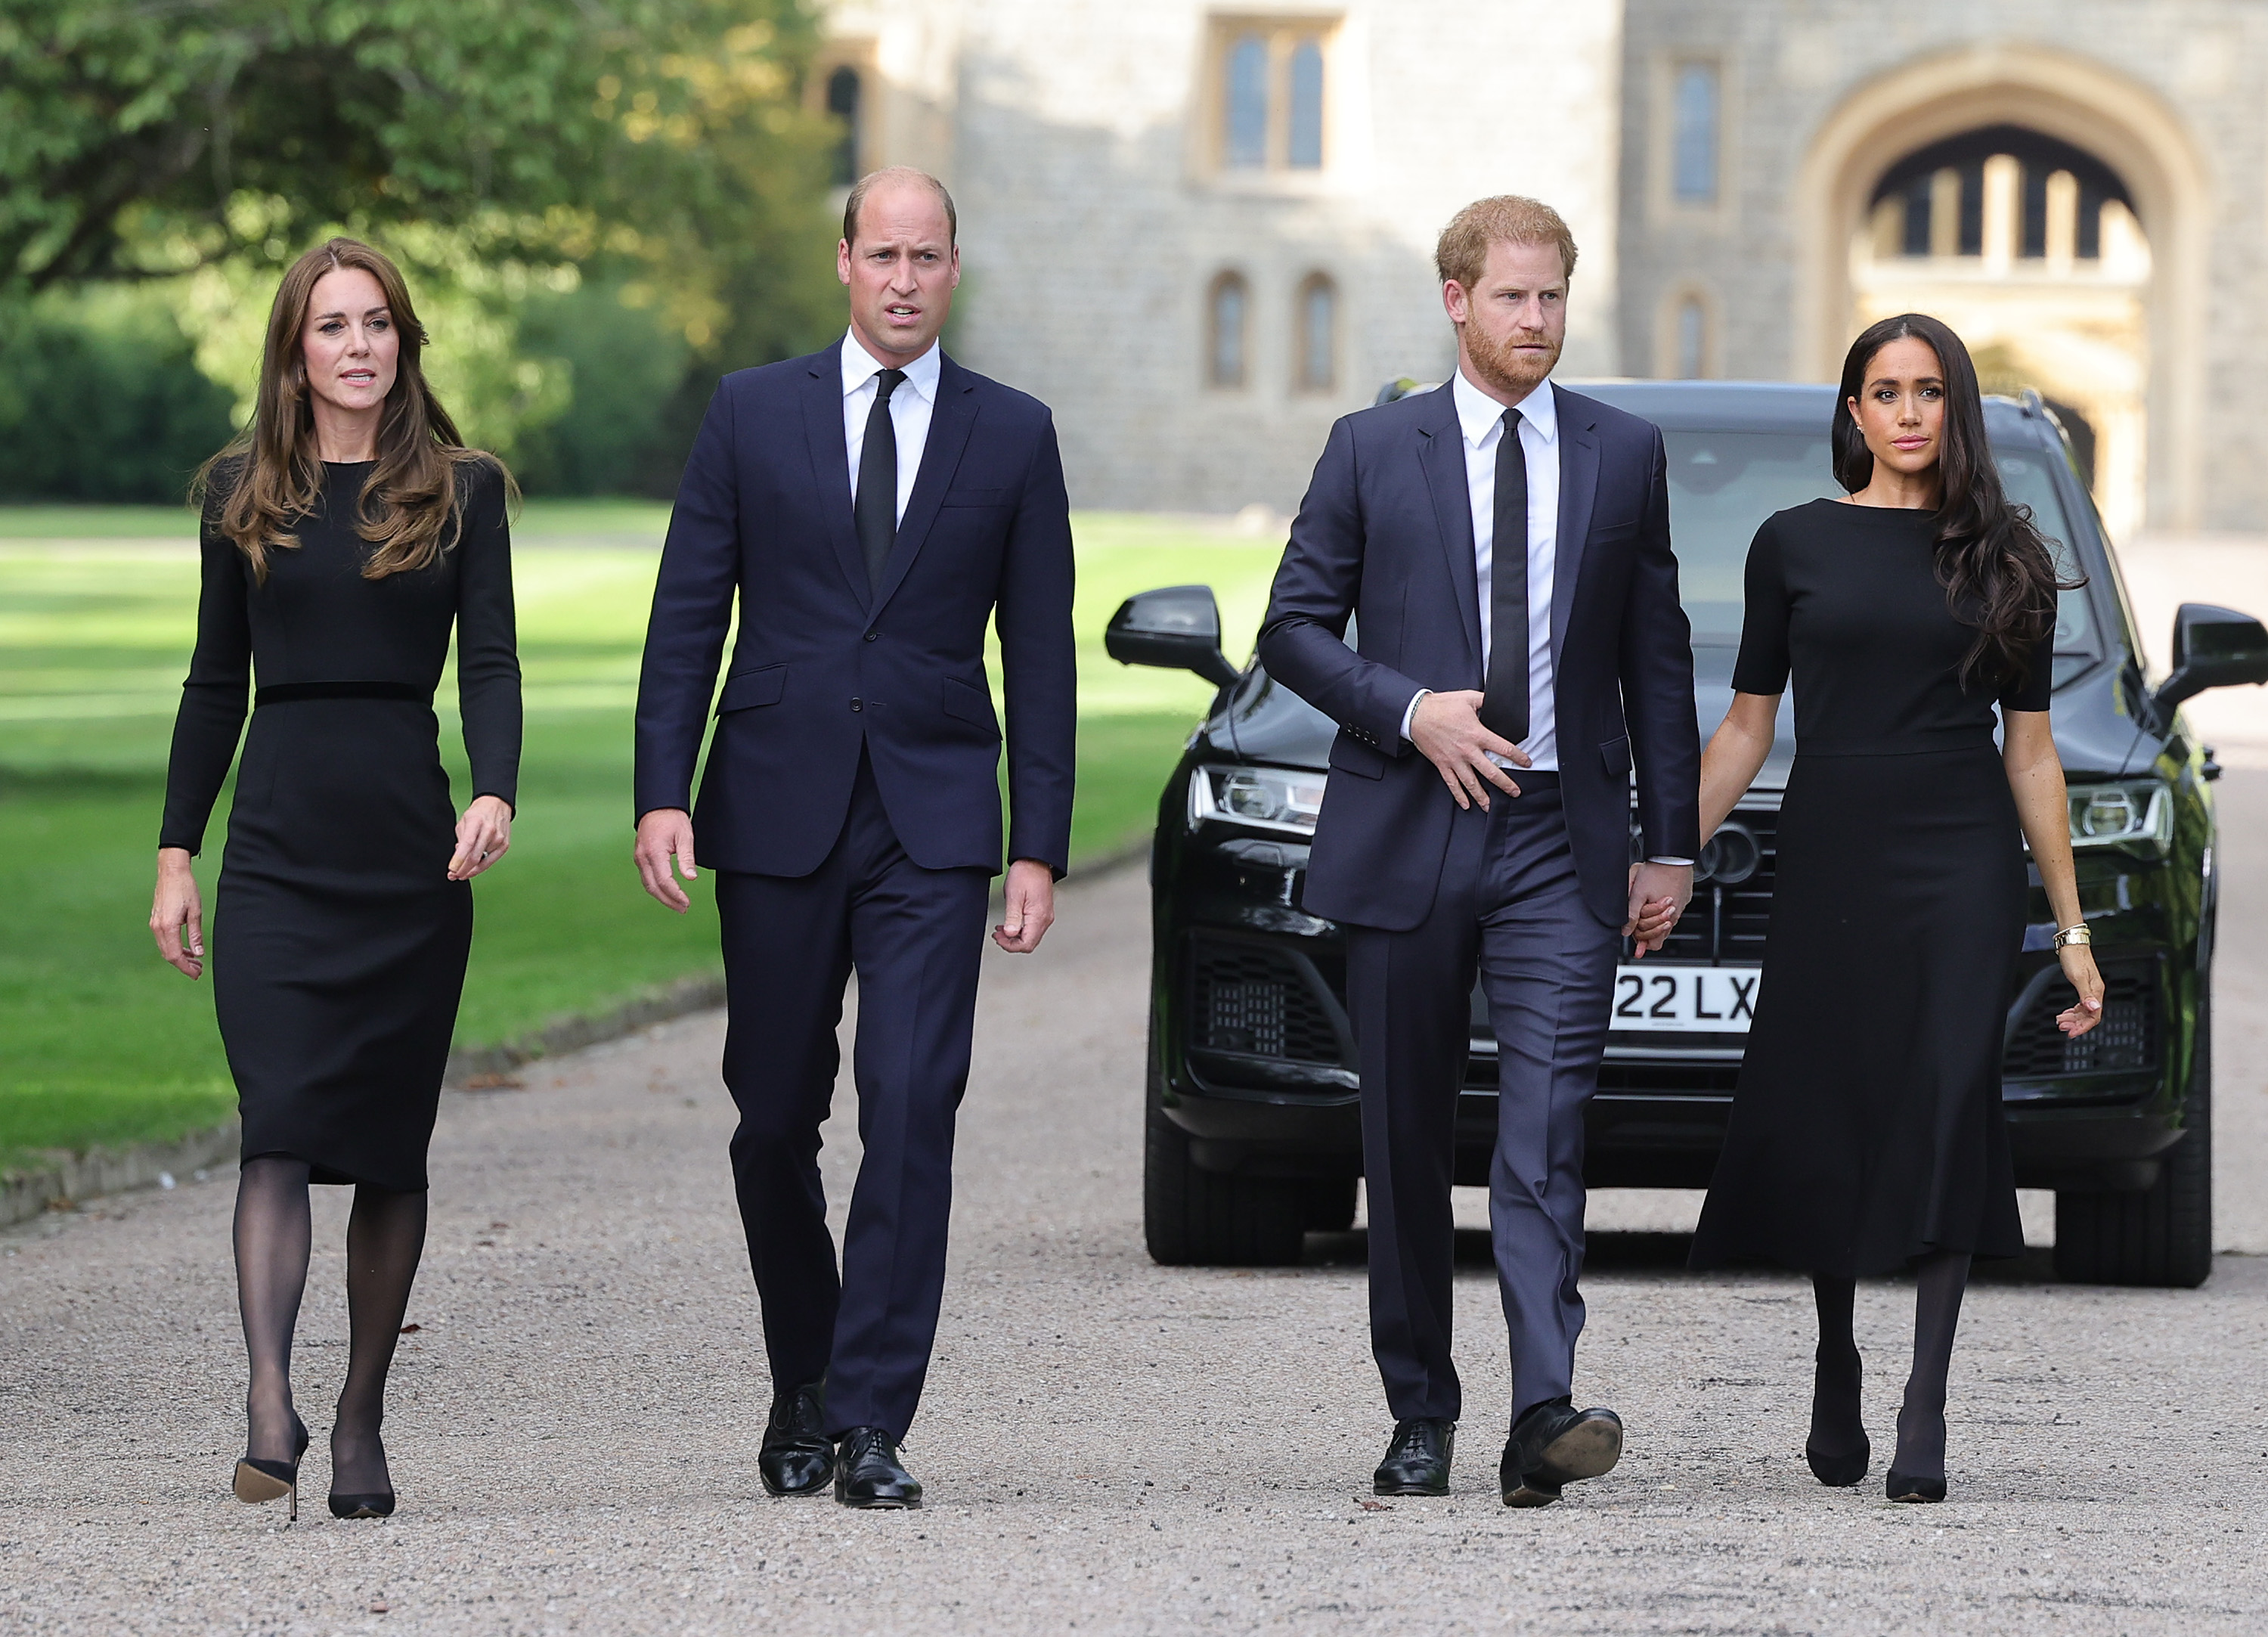 Prince William, Princess Catherine, Prince Harry, and Meghan Markle on a walkabout  Windsor Castle on 10th September 2022 | Source: Getty Images